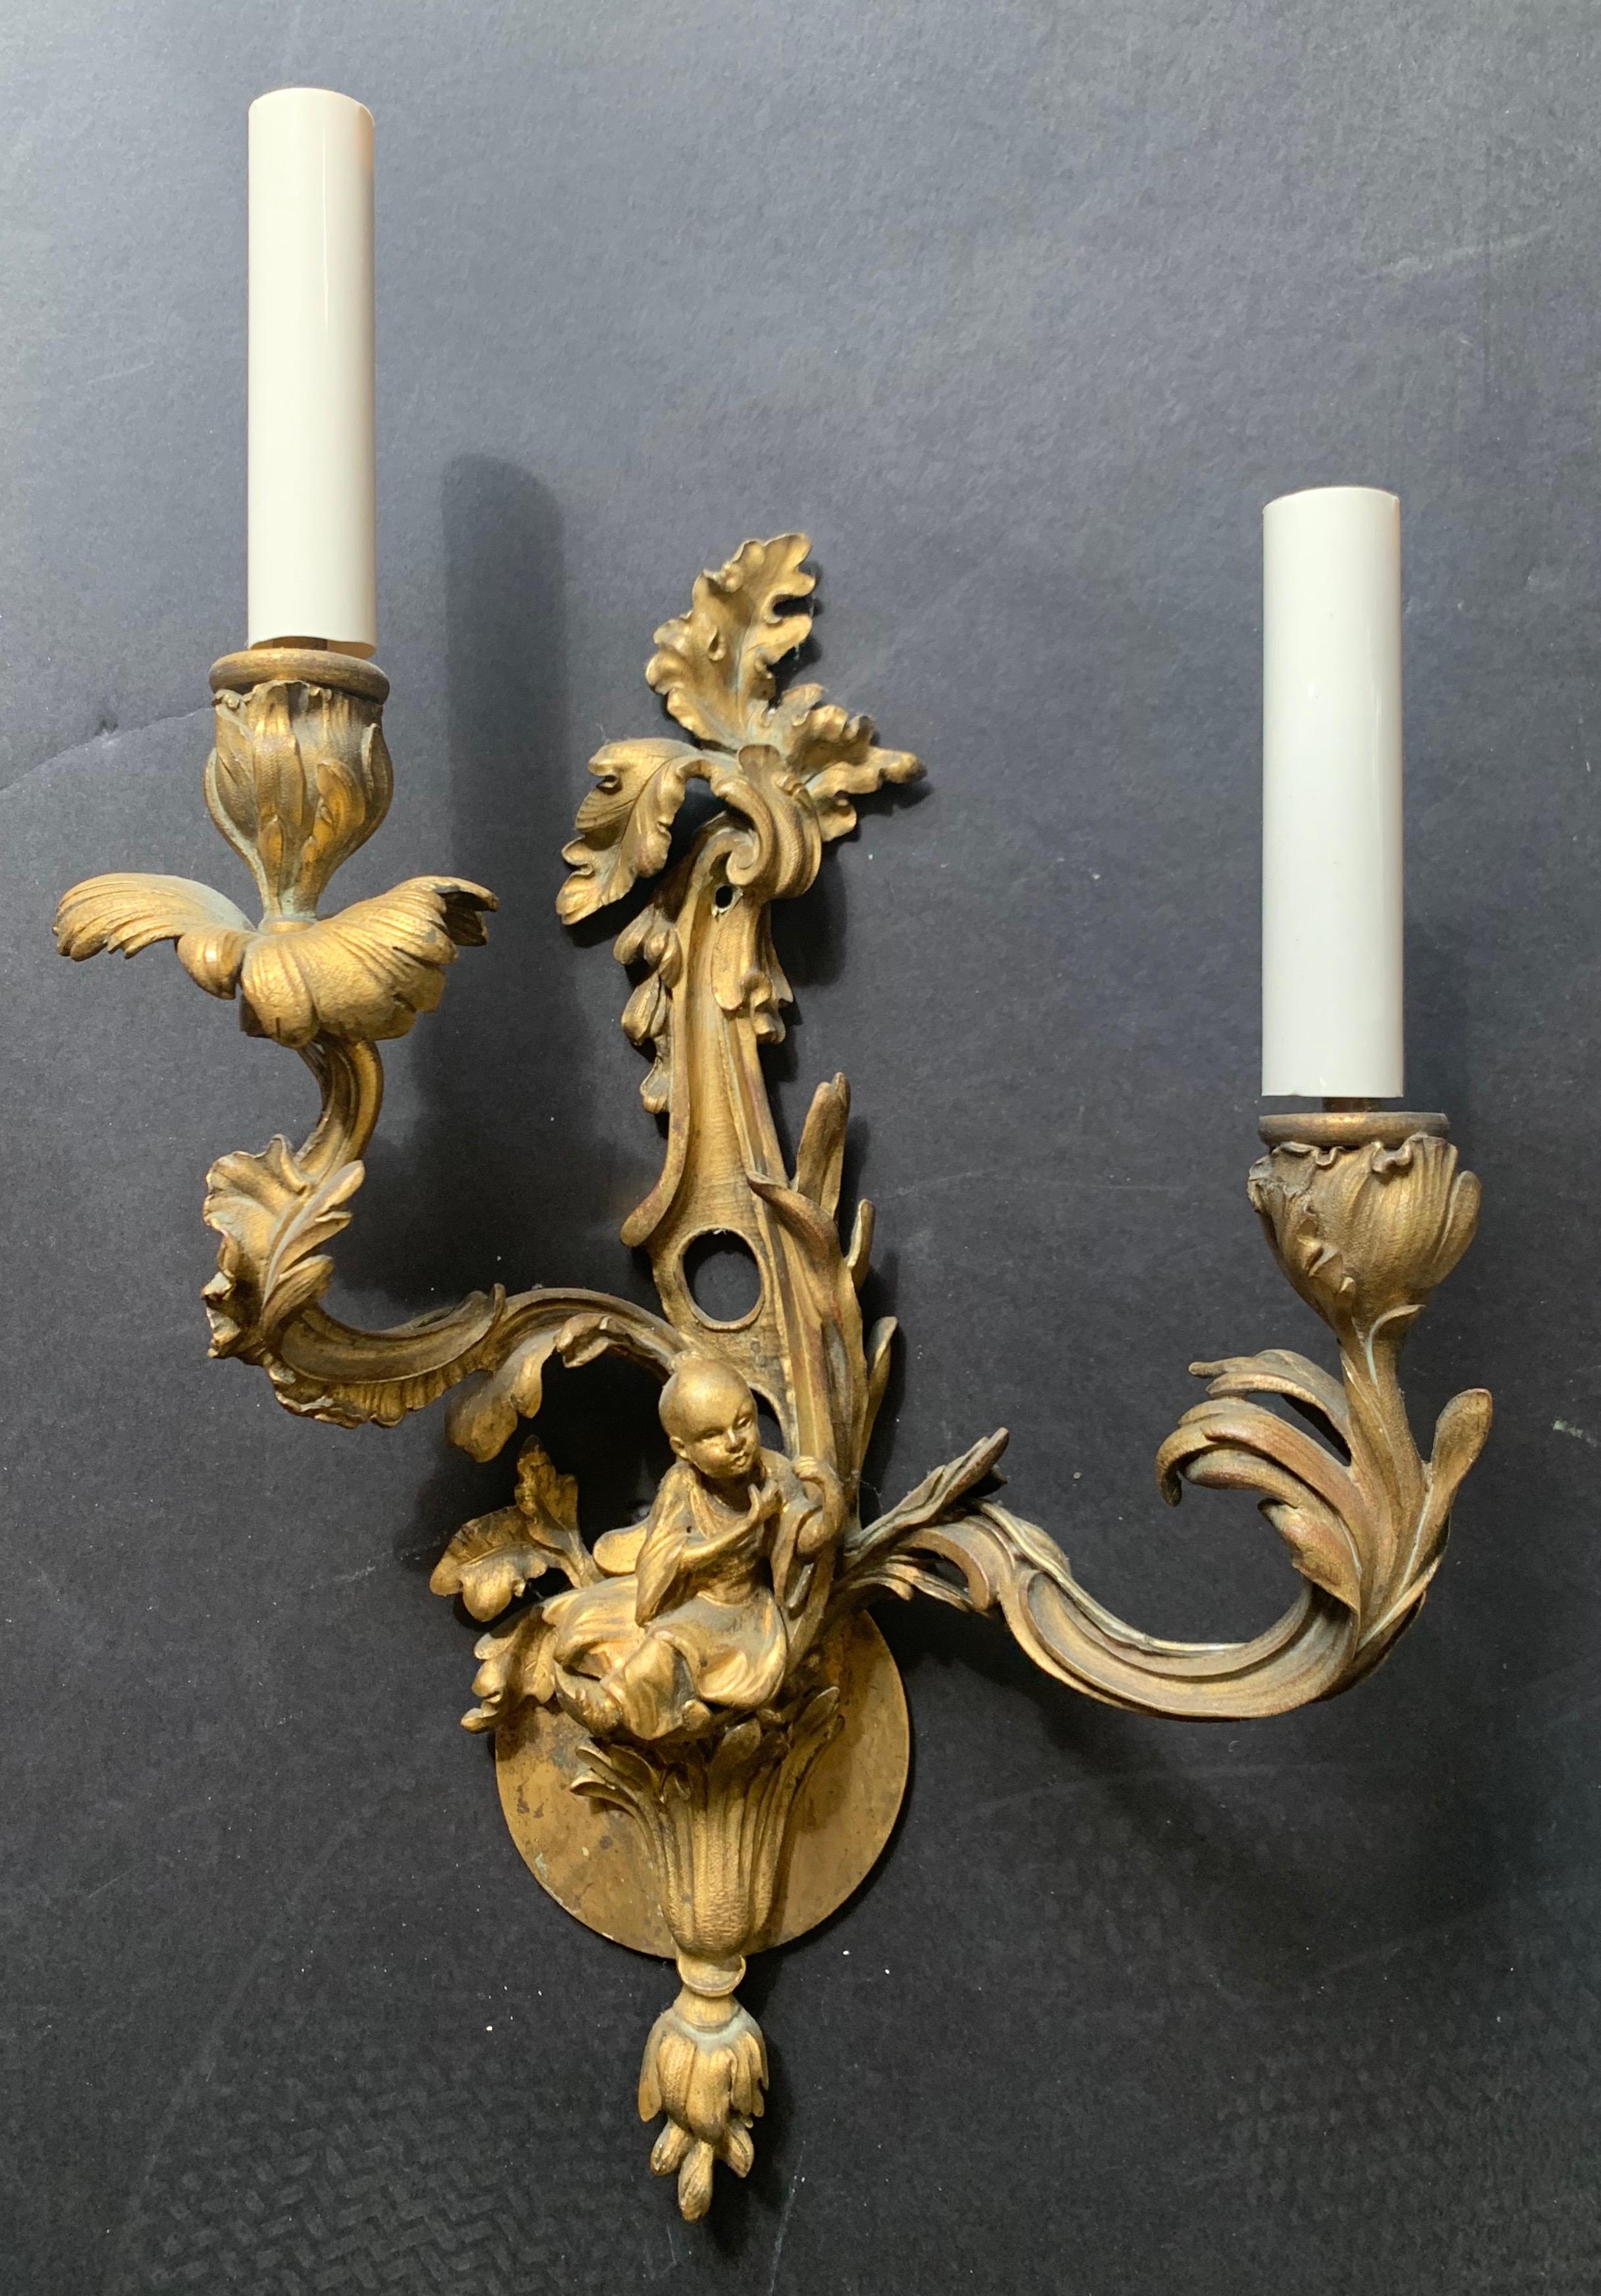 A wonderful pair of French doré bronze rococo figural chinoiserie 2 candelabra light wall sconces.